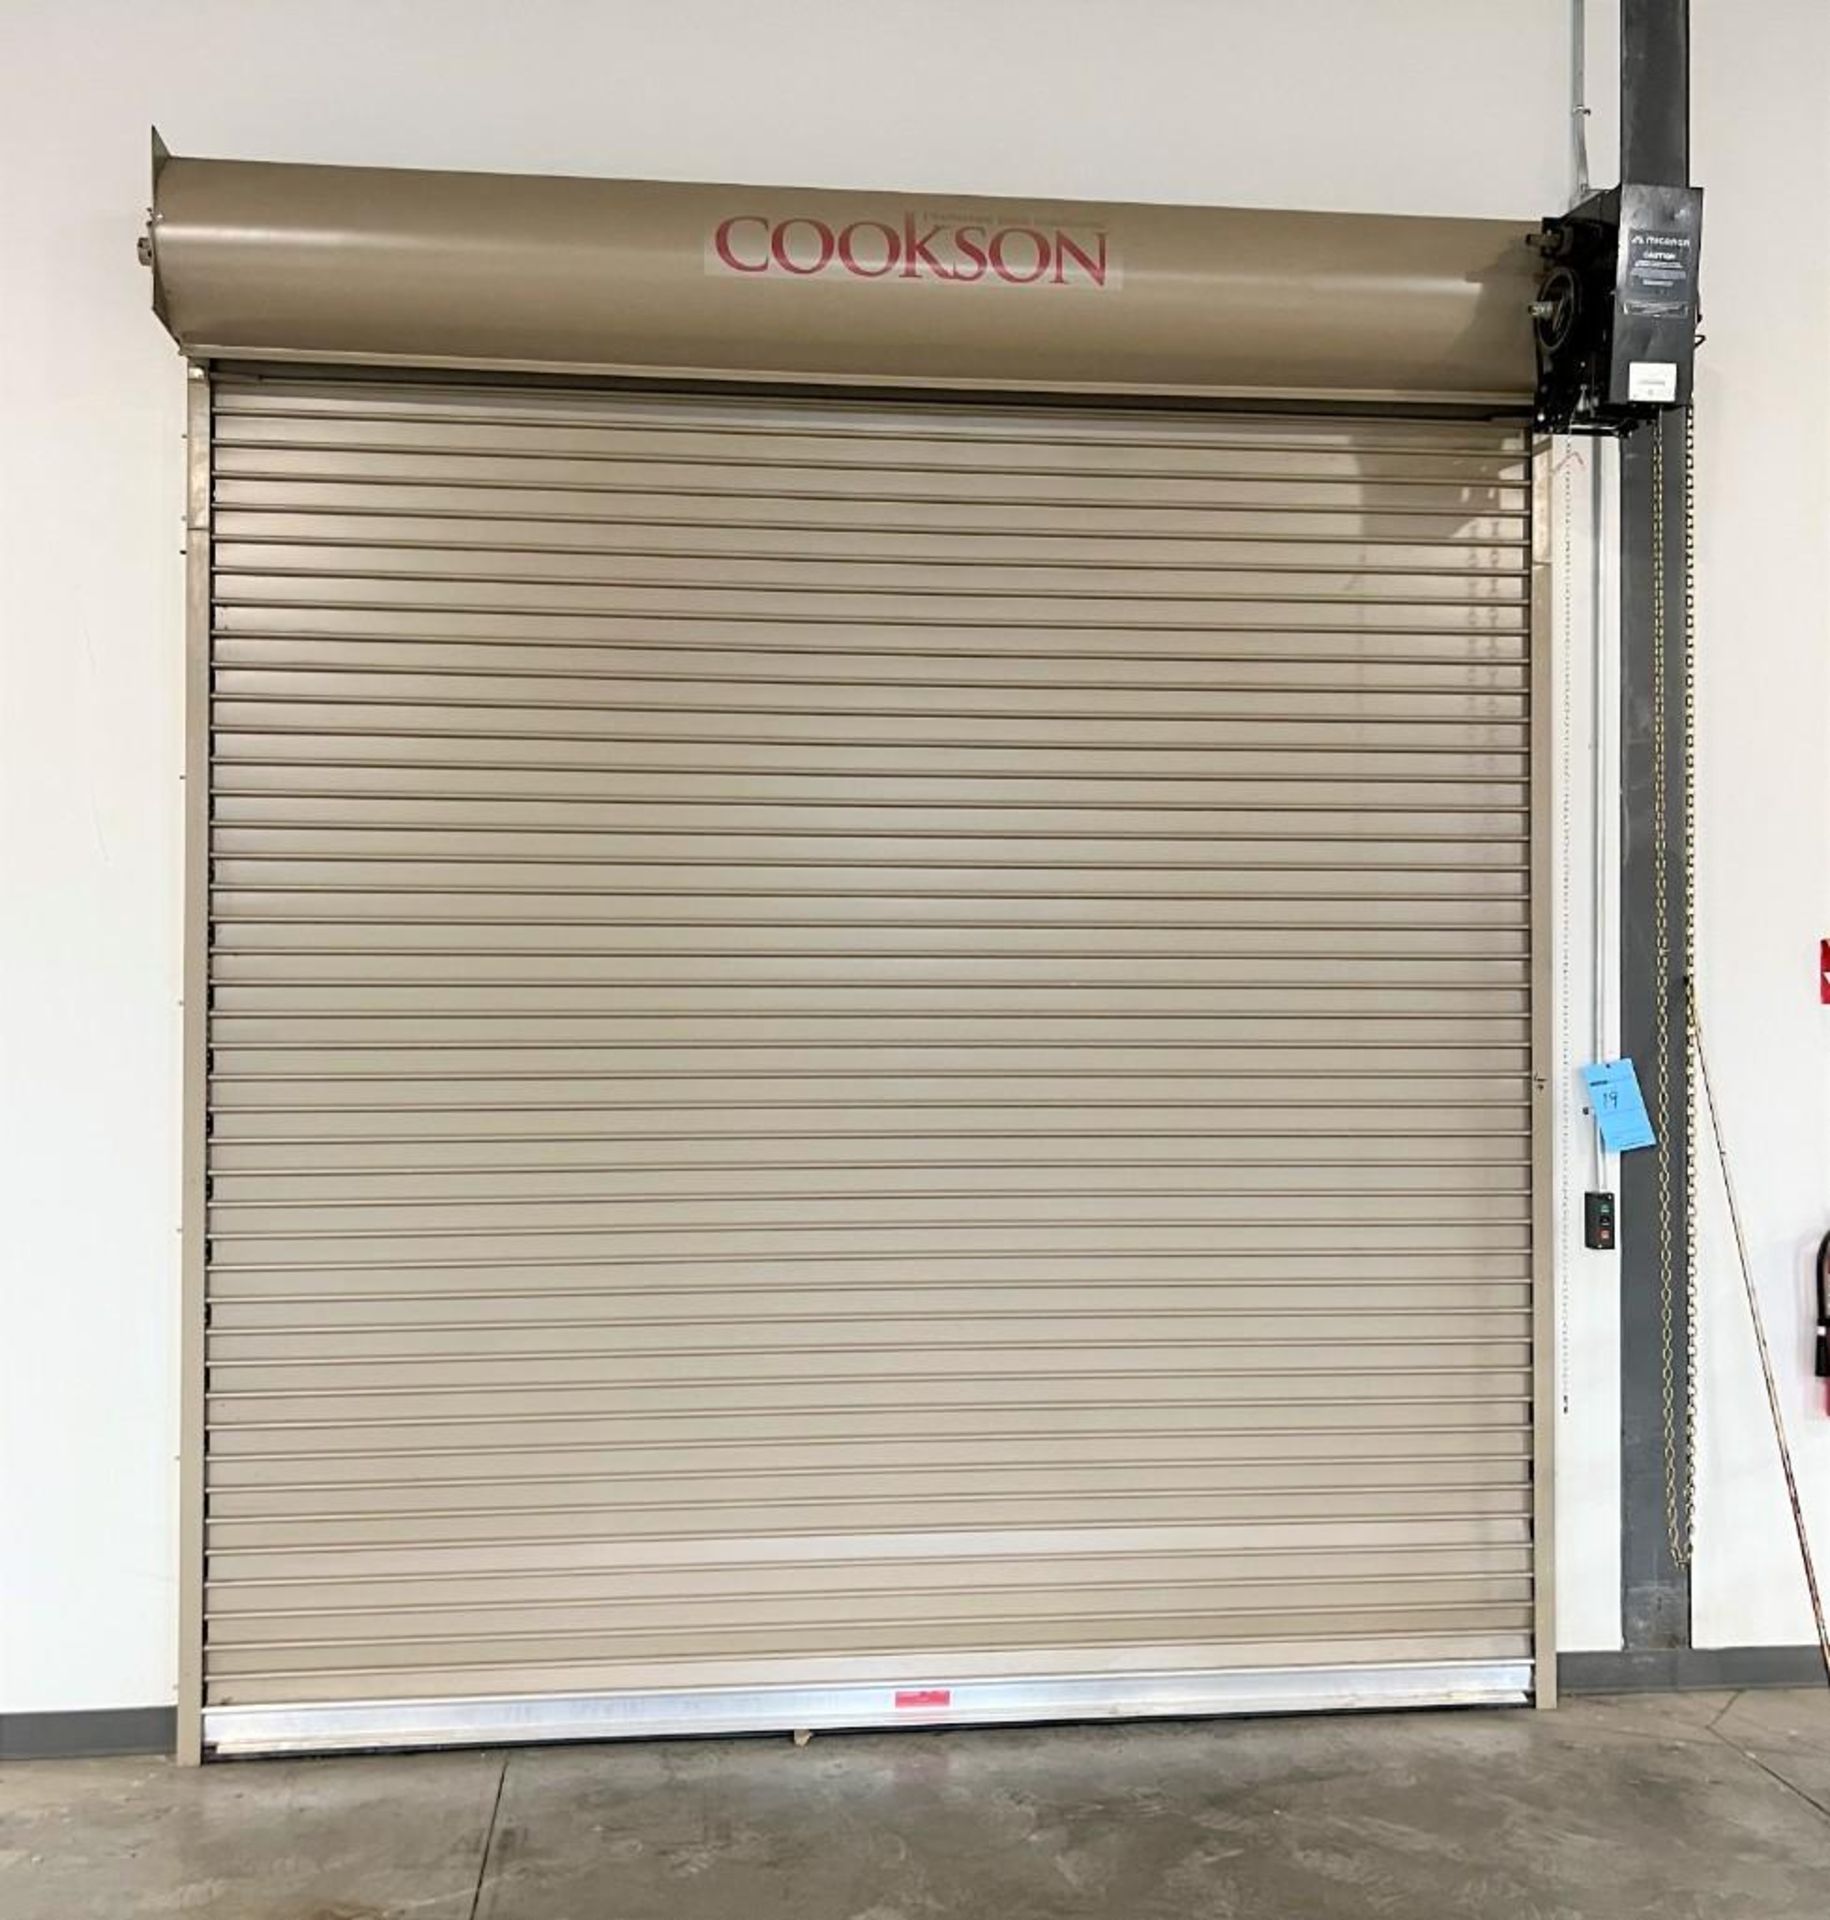 Cookson Rolling Door, Approximate 10' x 10' Opening, Serial# SO7118626-001, Built 12/19/2018. With M